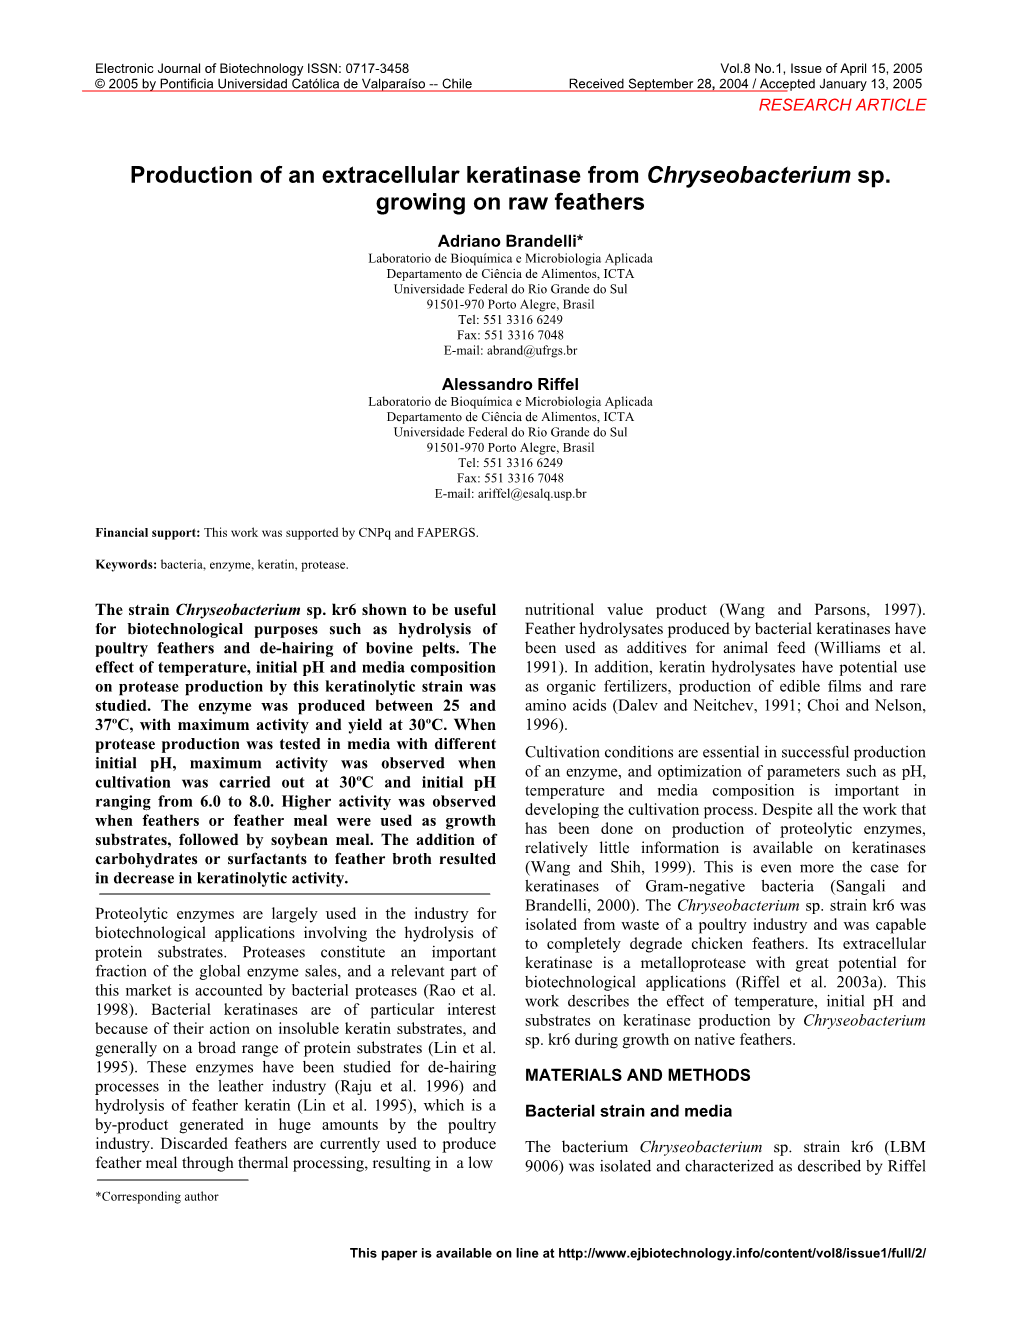 Production of an Extracellular Keratinase from Chryseobacterium Sp